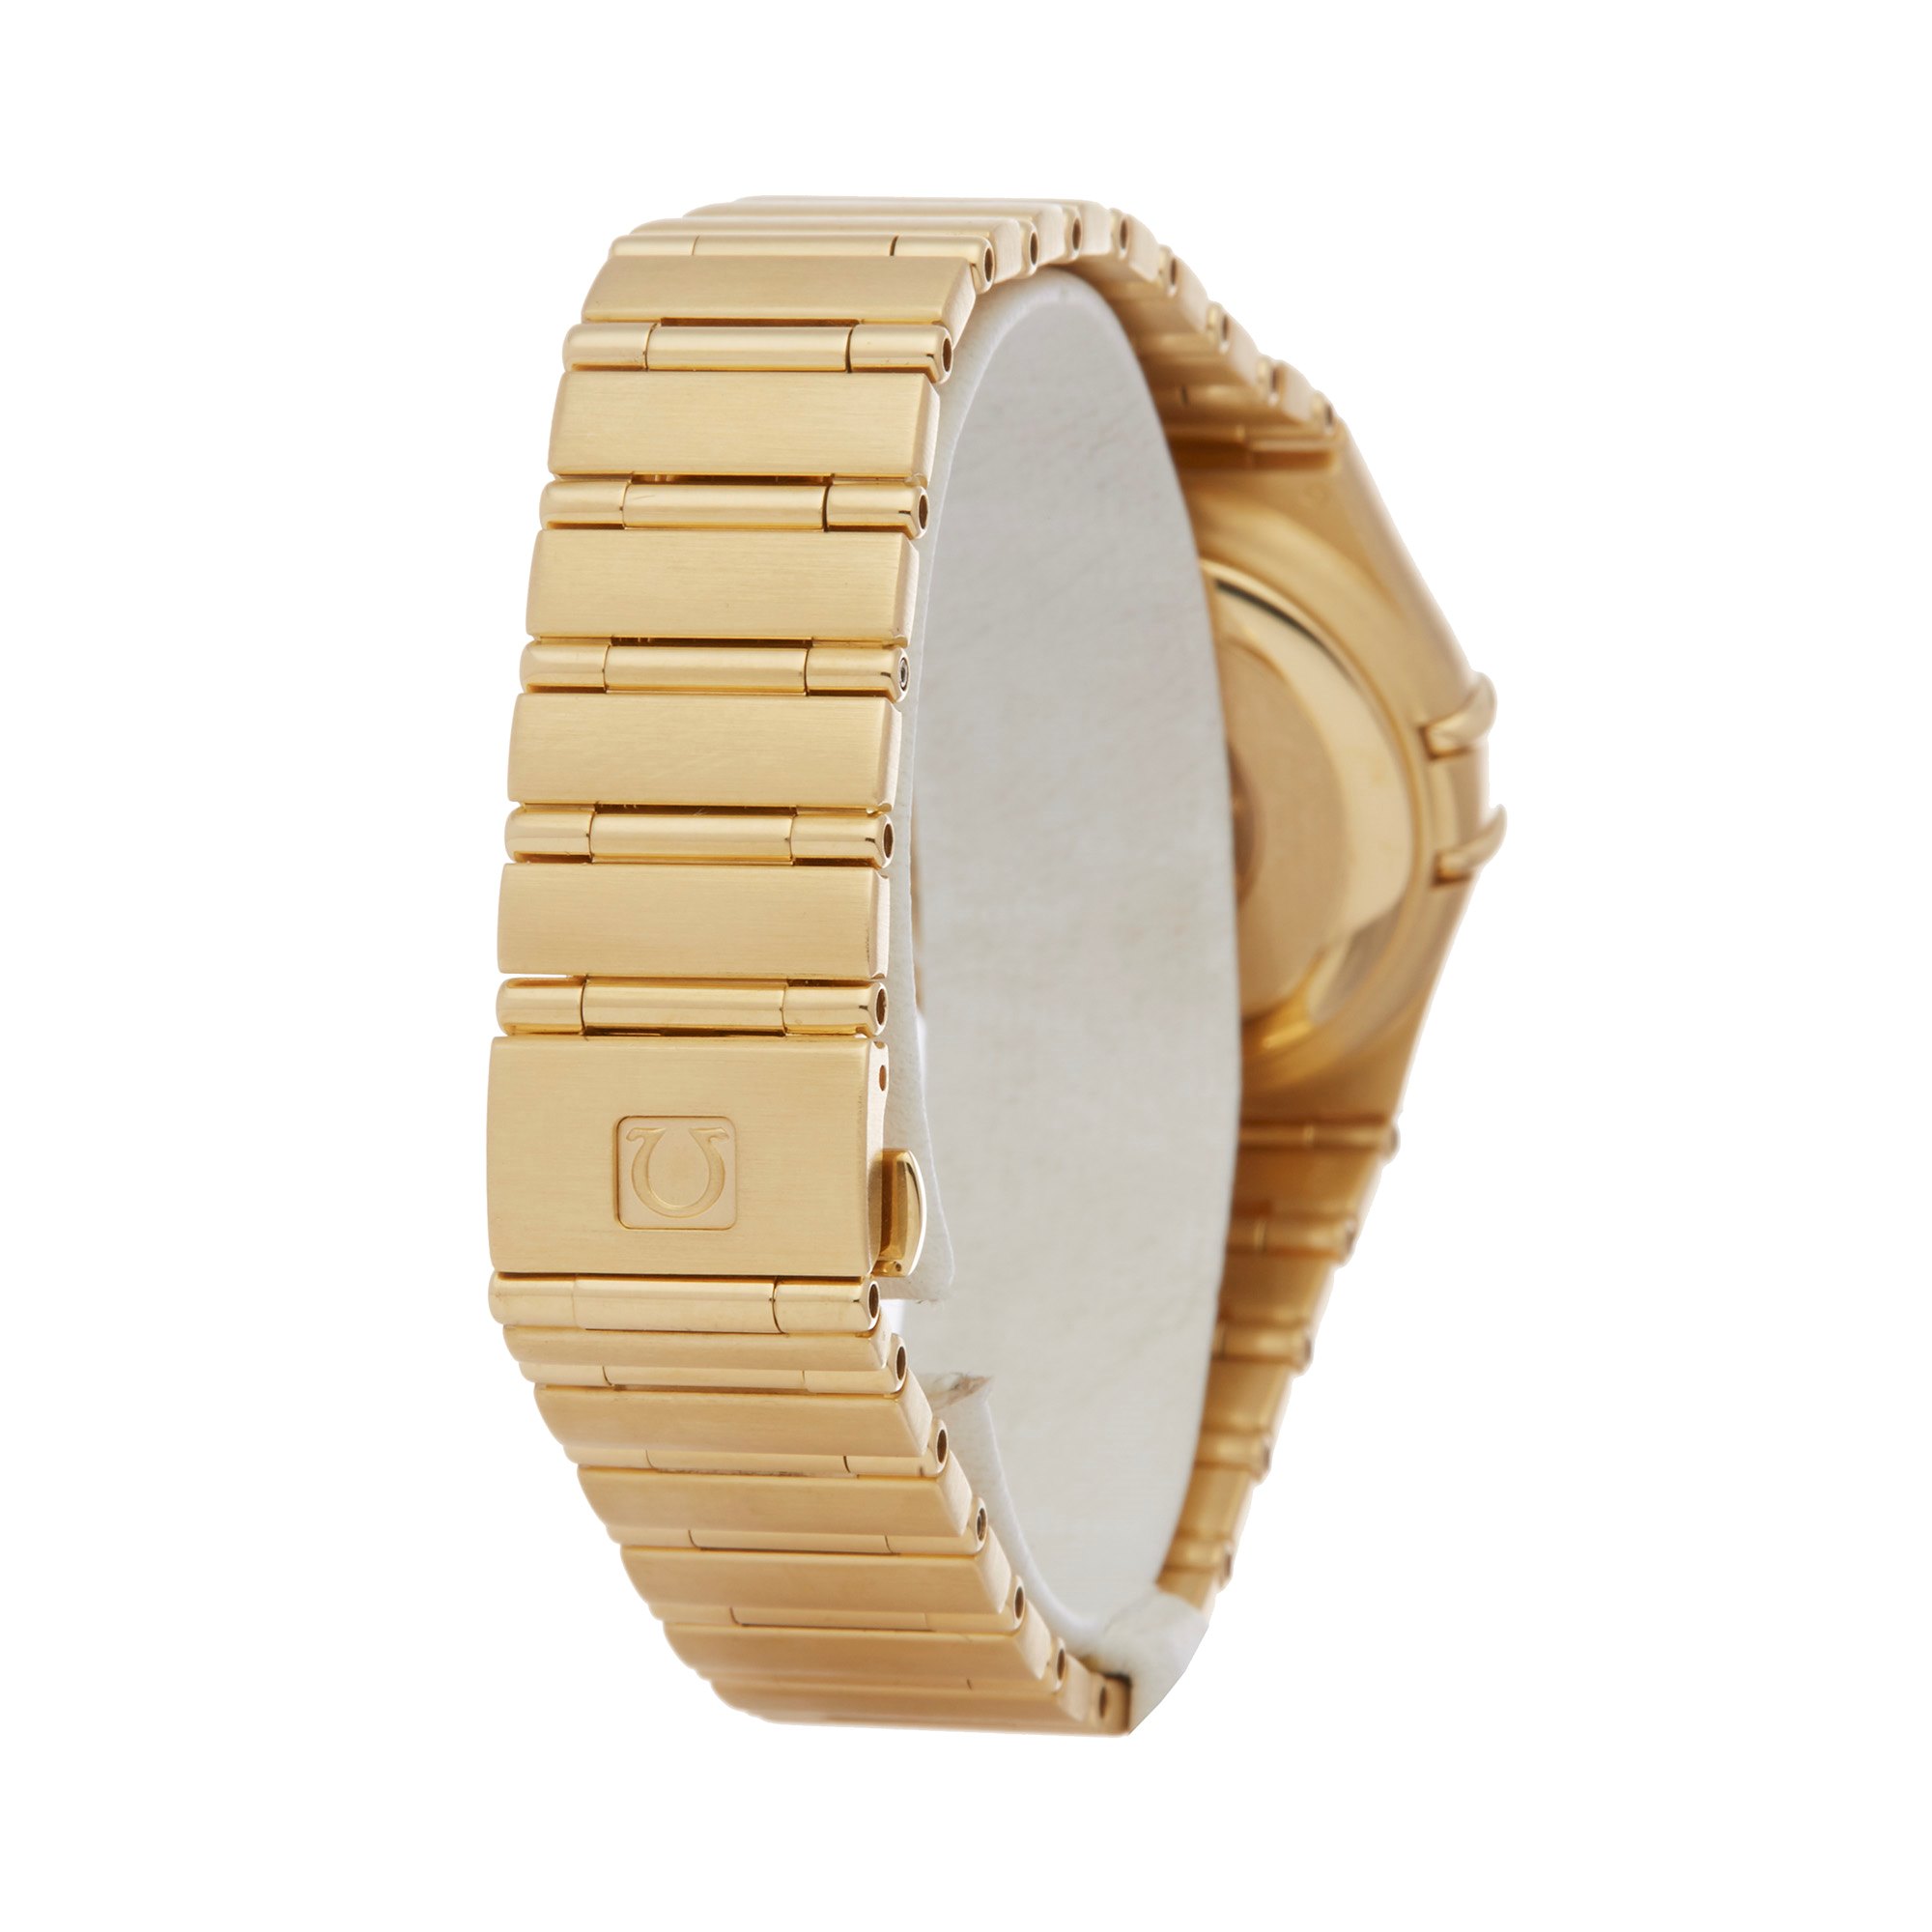 Omega Constellation 1197.79.00 Ladies Yellow Gold Iris Mid Size Automatic Watch - Image 5 of 7